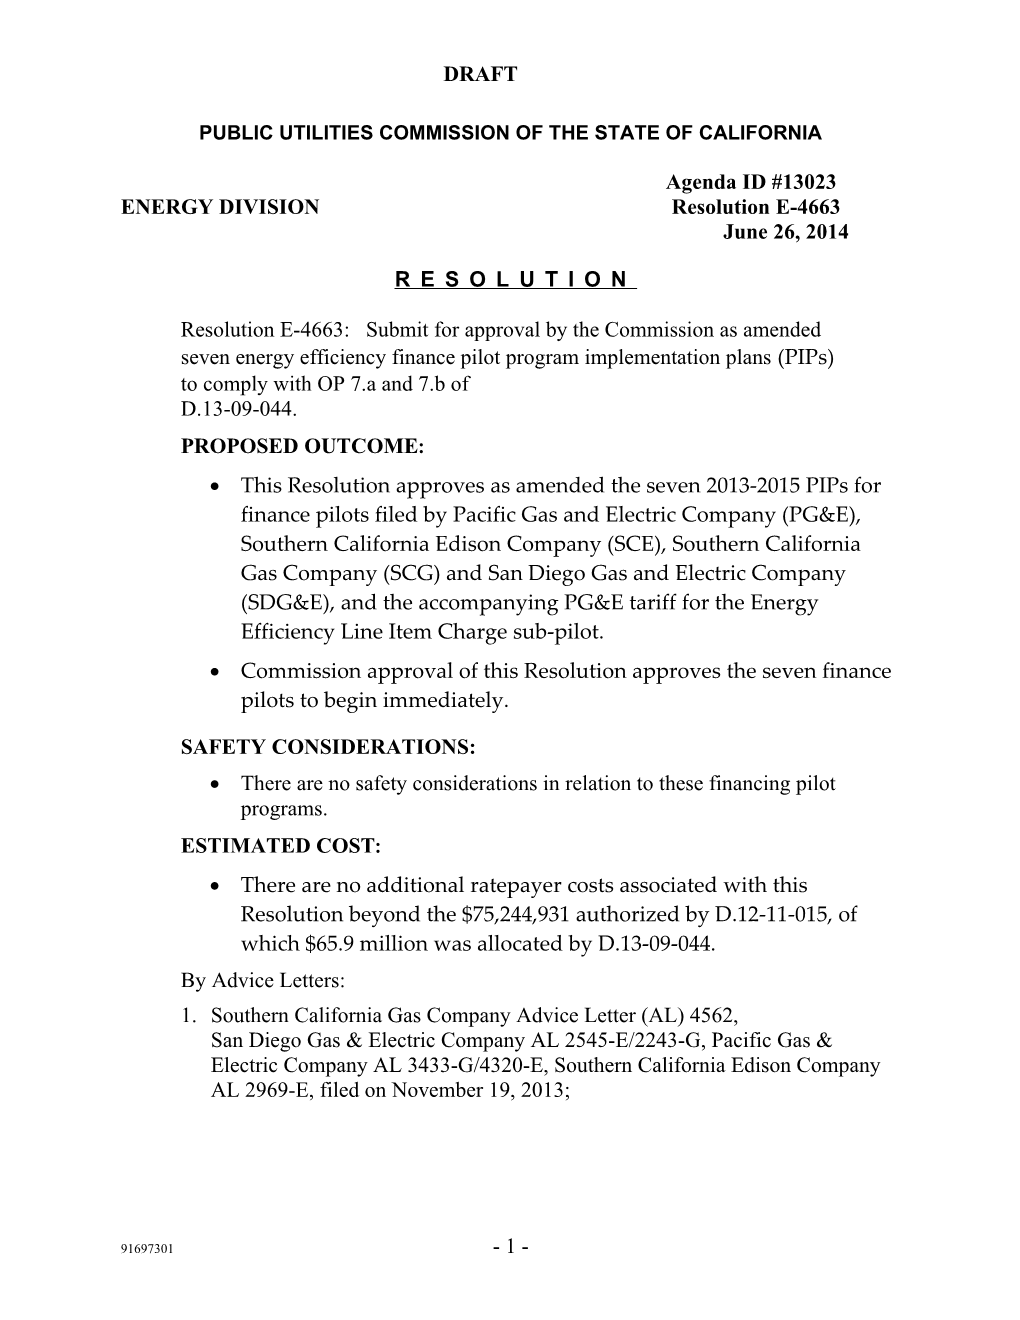 Public Utilities Commission of the State of California s122